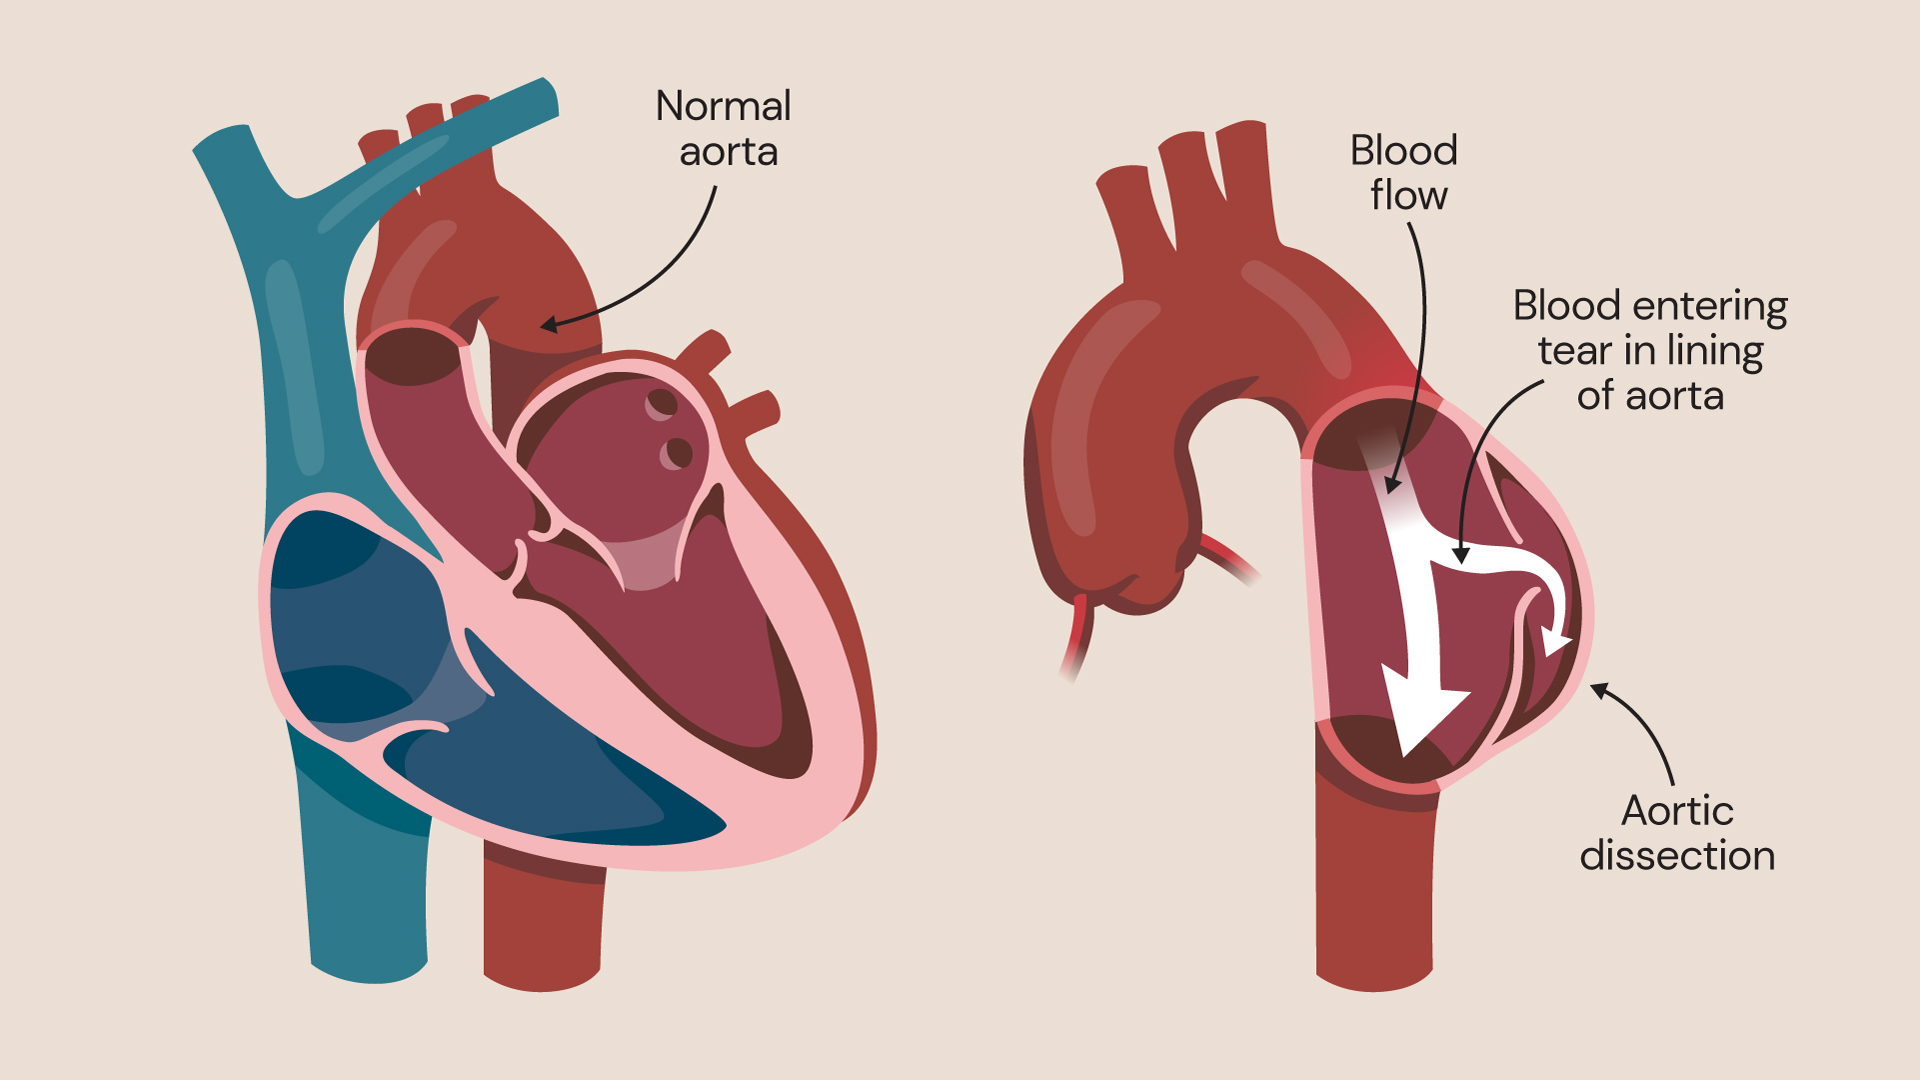 Healthy aorta vs aortic dissection